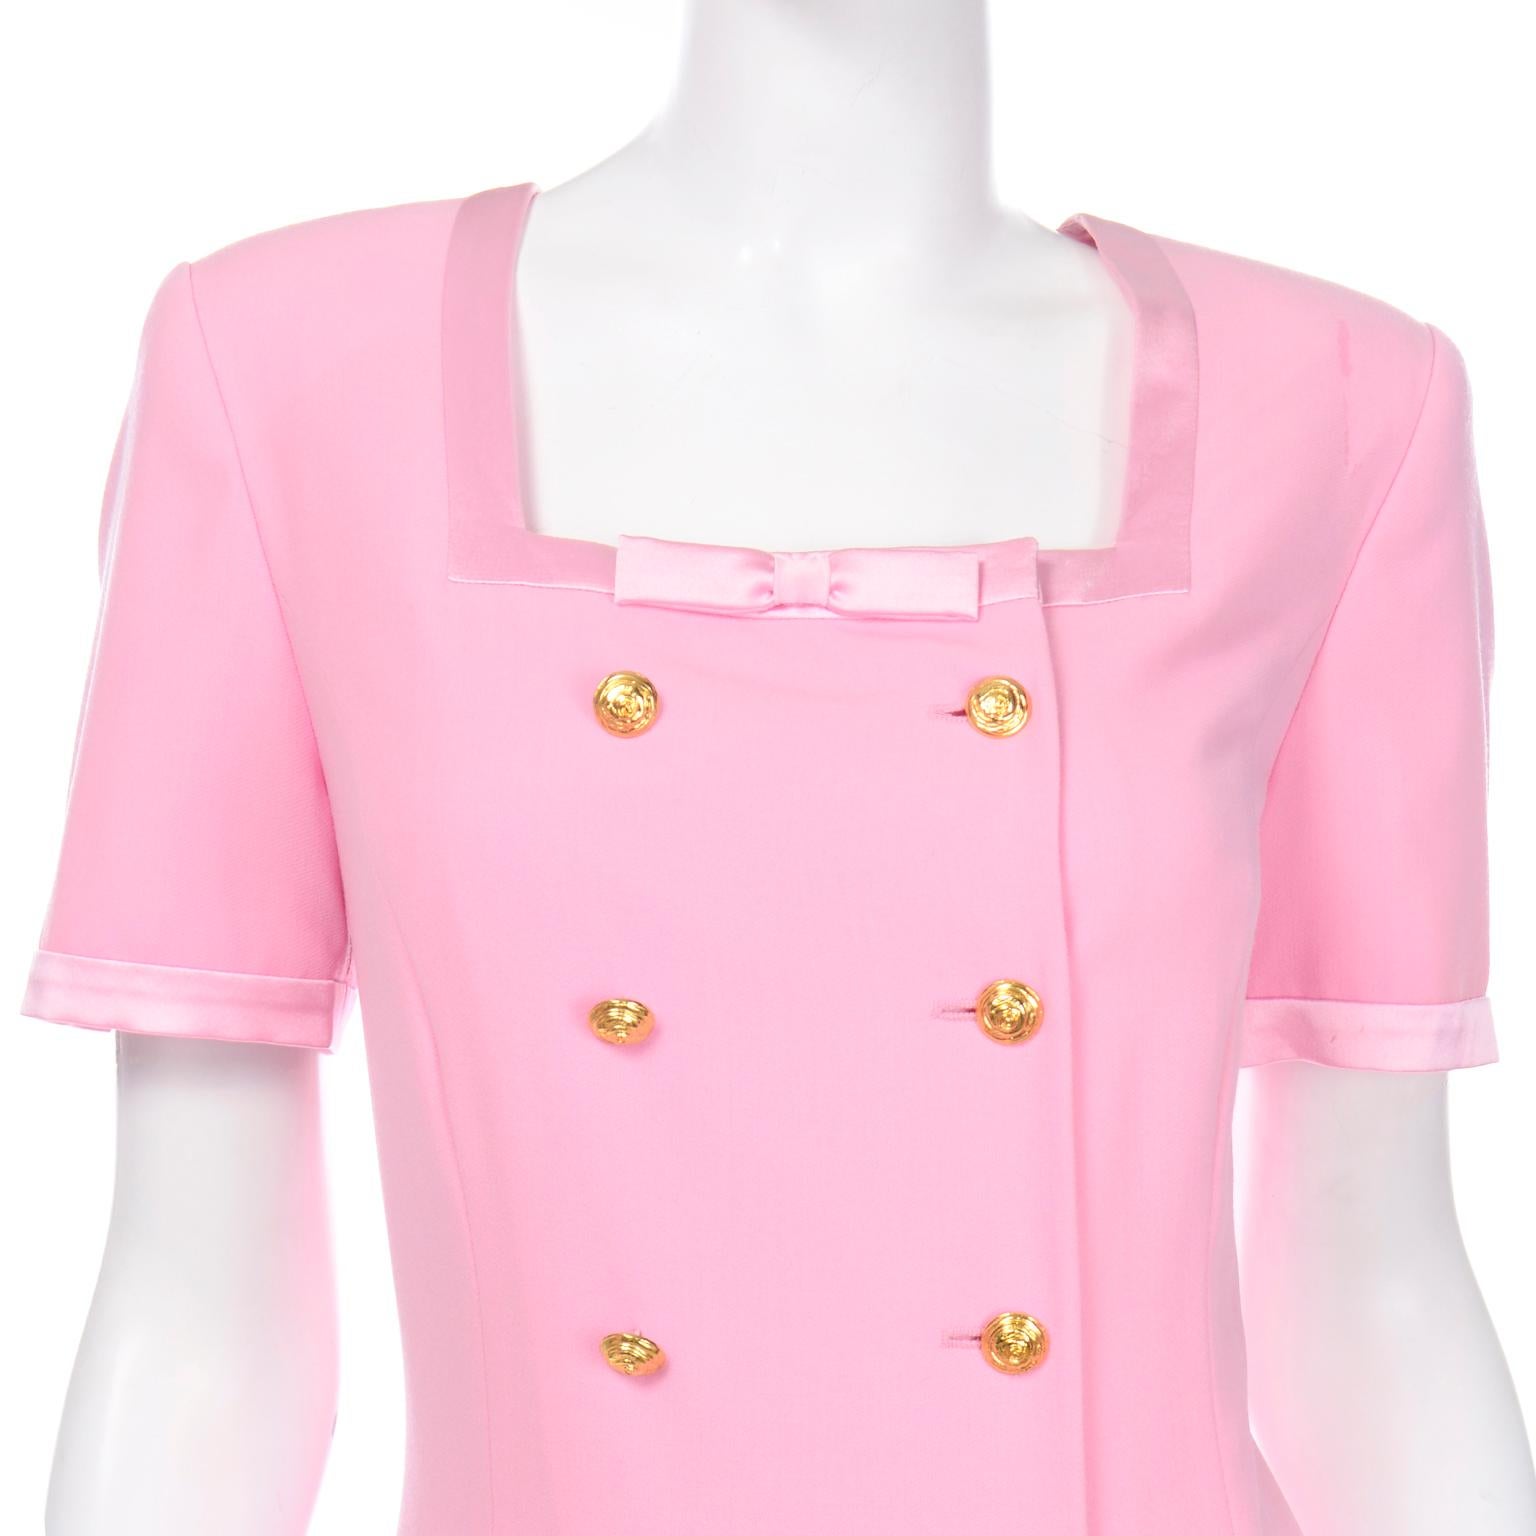 Vintage Escada PinkDress With Double Breasted Gold Buttons and Drop Waist In Excellent Condition For Sale In Portland, OR